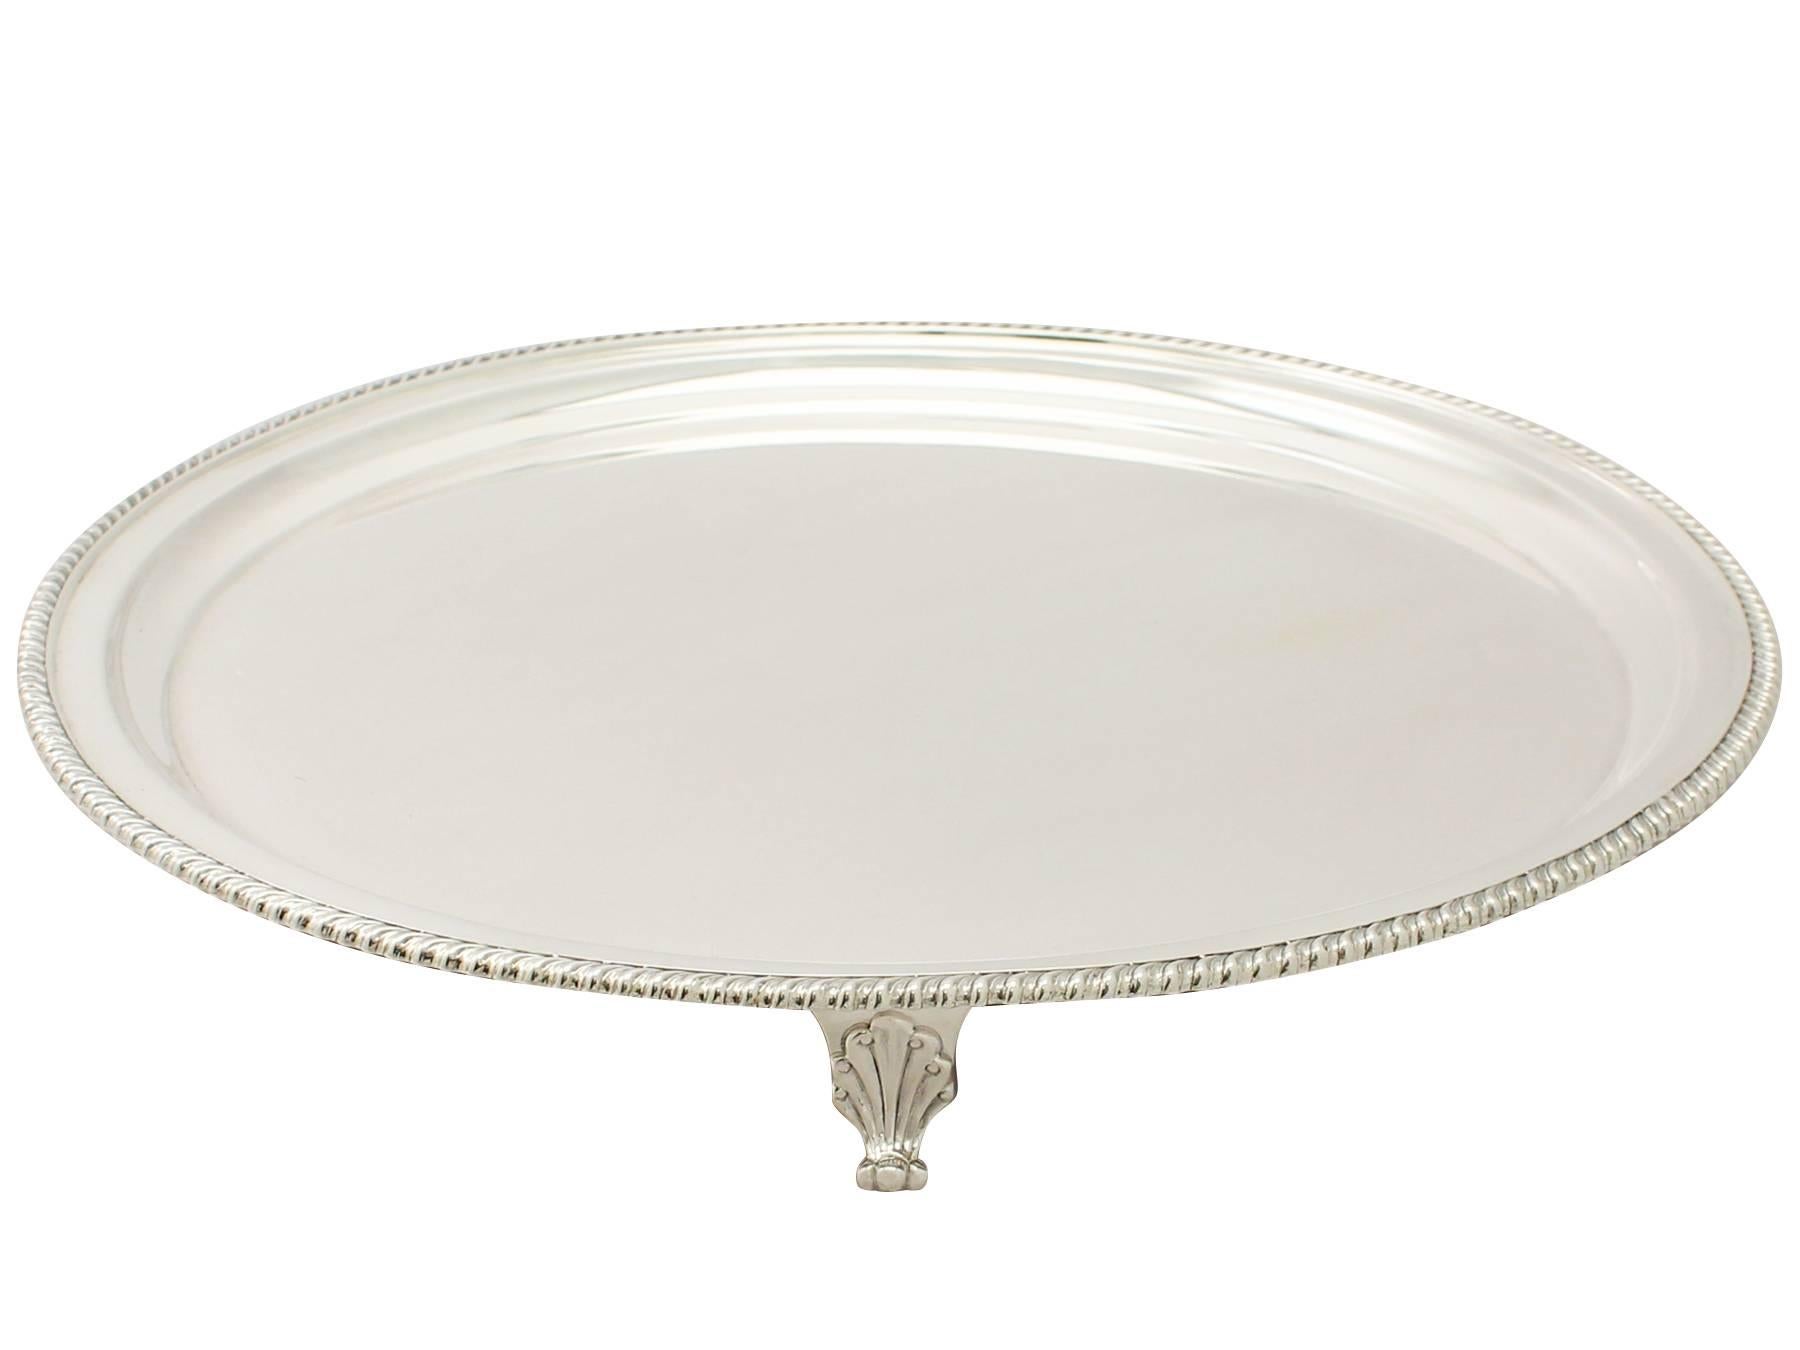 Antique English Sterling Silver Presentation Salver In Excellent Condition For Sale In Jesmond, Newcastle Upon Tyne